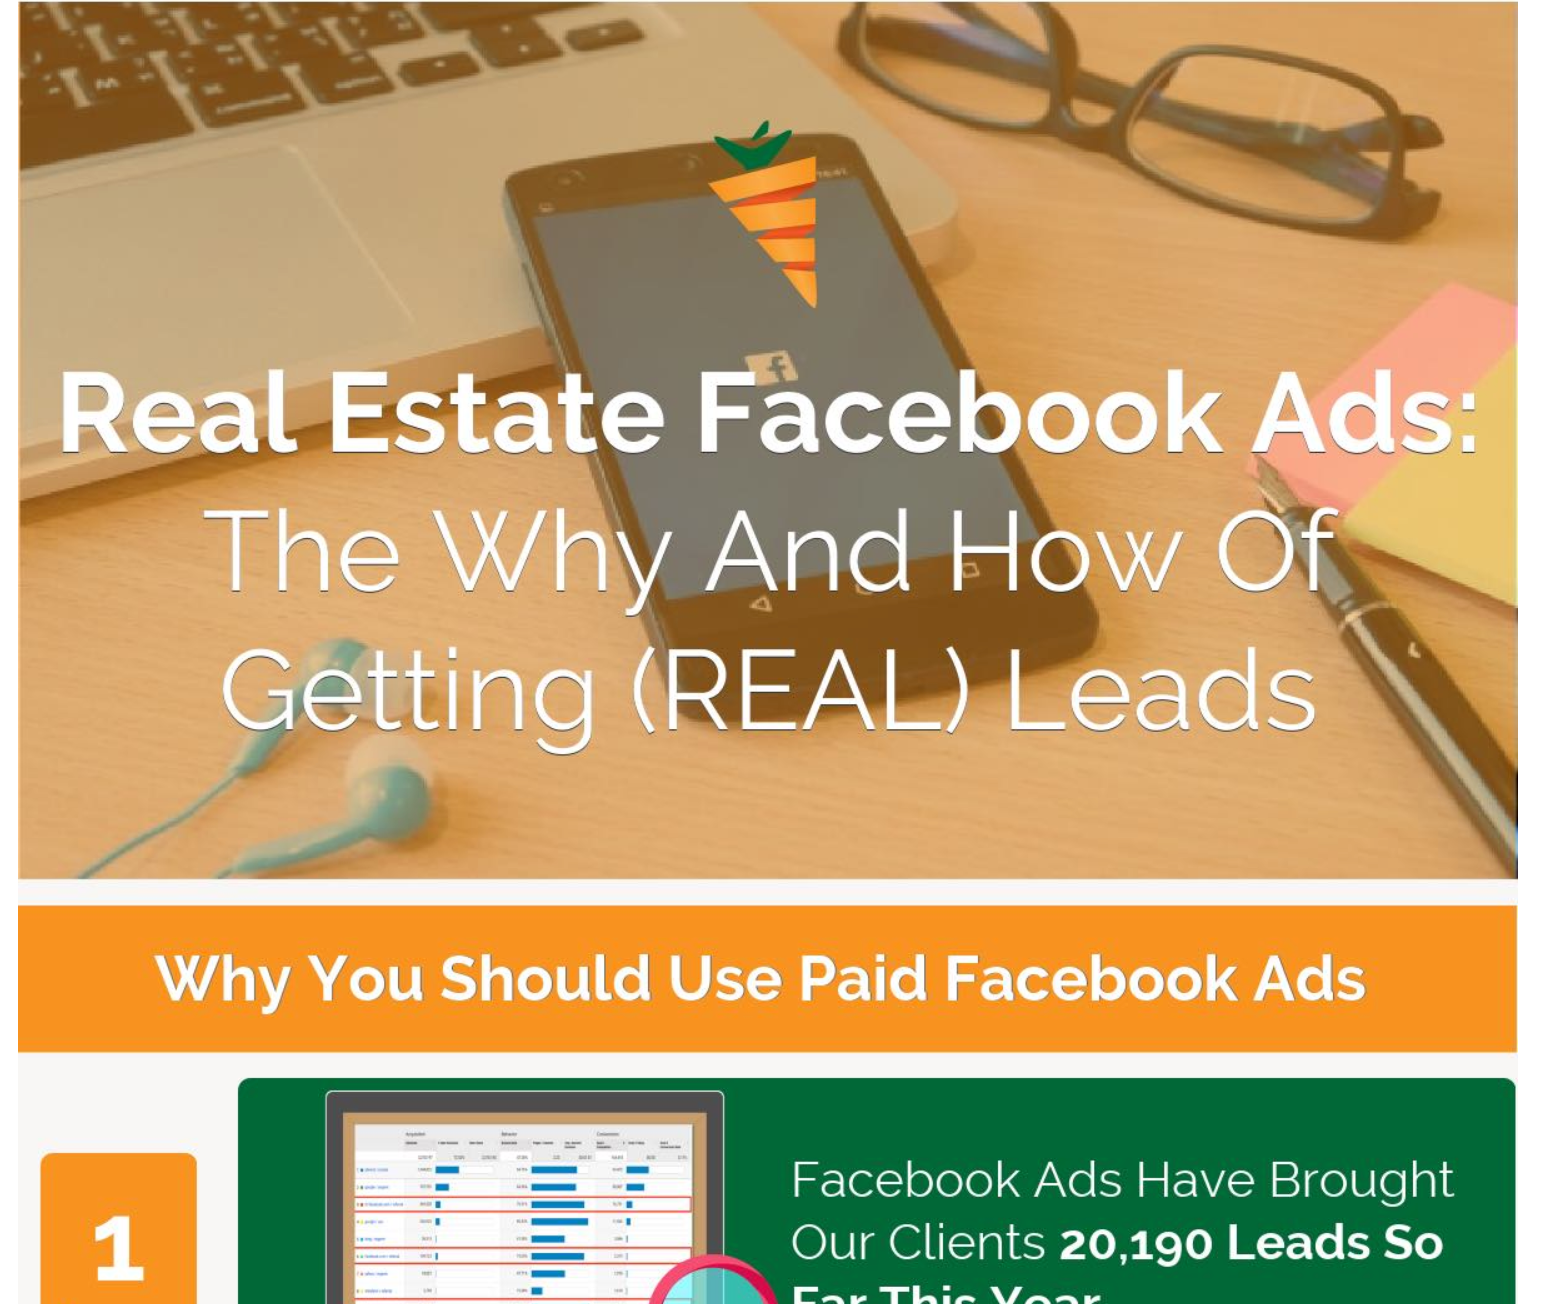 Real Estate Facebook Ads The Why and How of Getting Leads Infographic 1